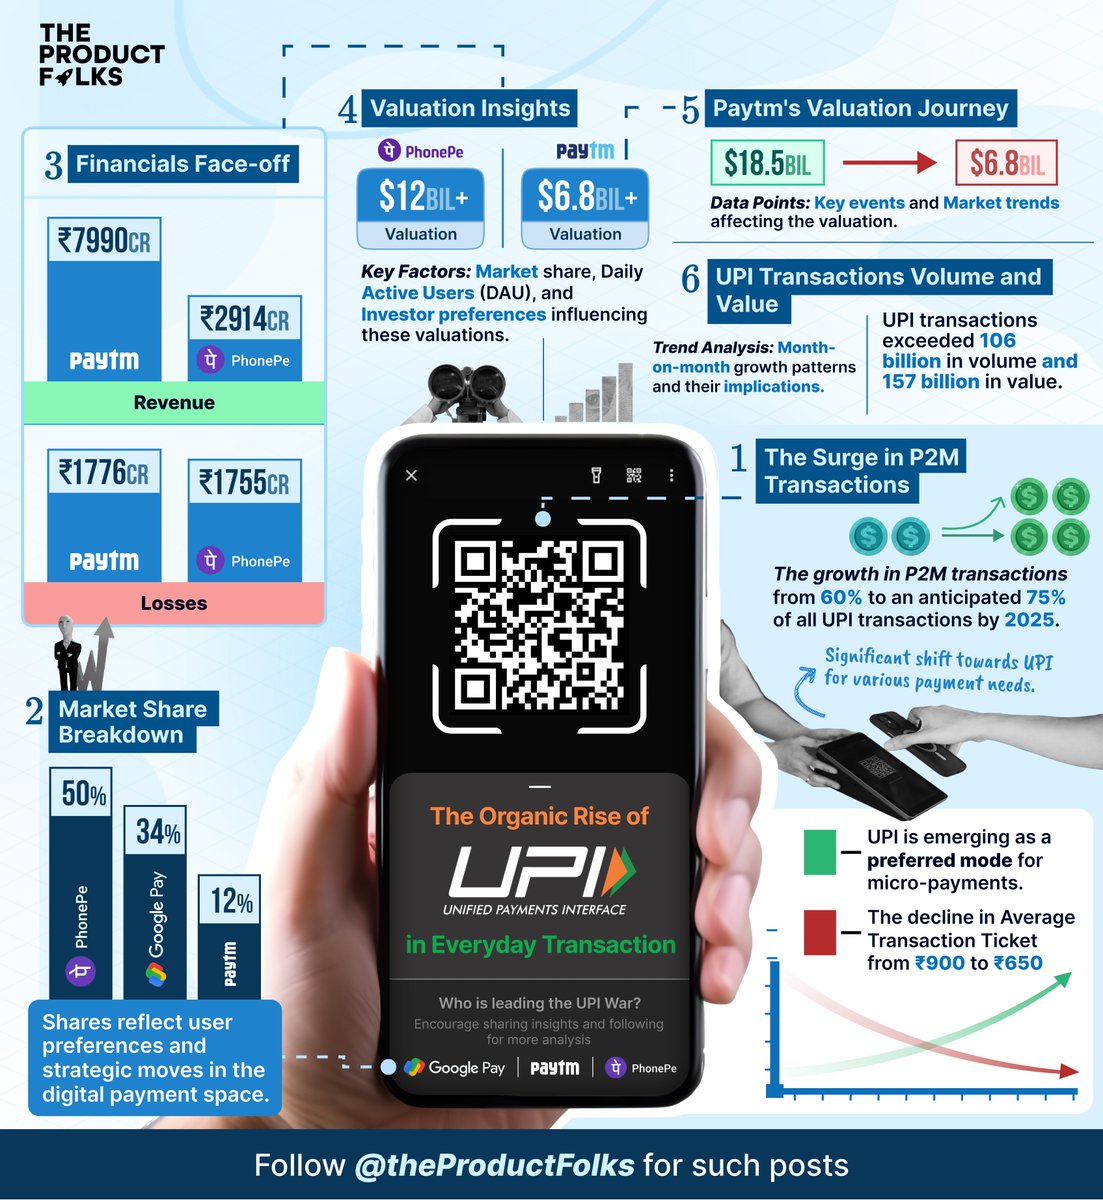 Average transaction ticket slides from Rs 900 to Rs 650 as UPI emerges as the champion of micro-payments 🤯 Two giants, @Paytm and @PhoneP, are battling for supremacy in the world of micro-payments. Let's dive into the details and find out who's leading the way: ✅ P2M…